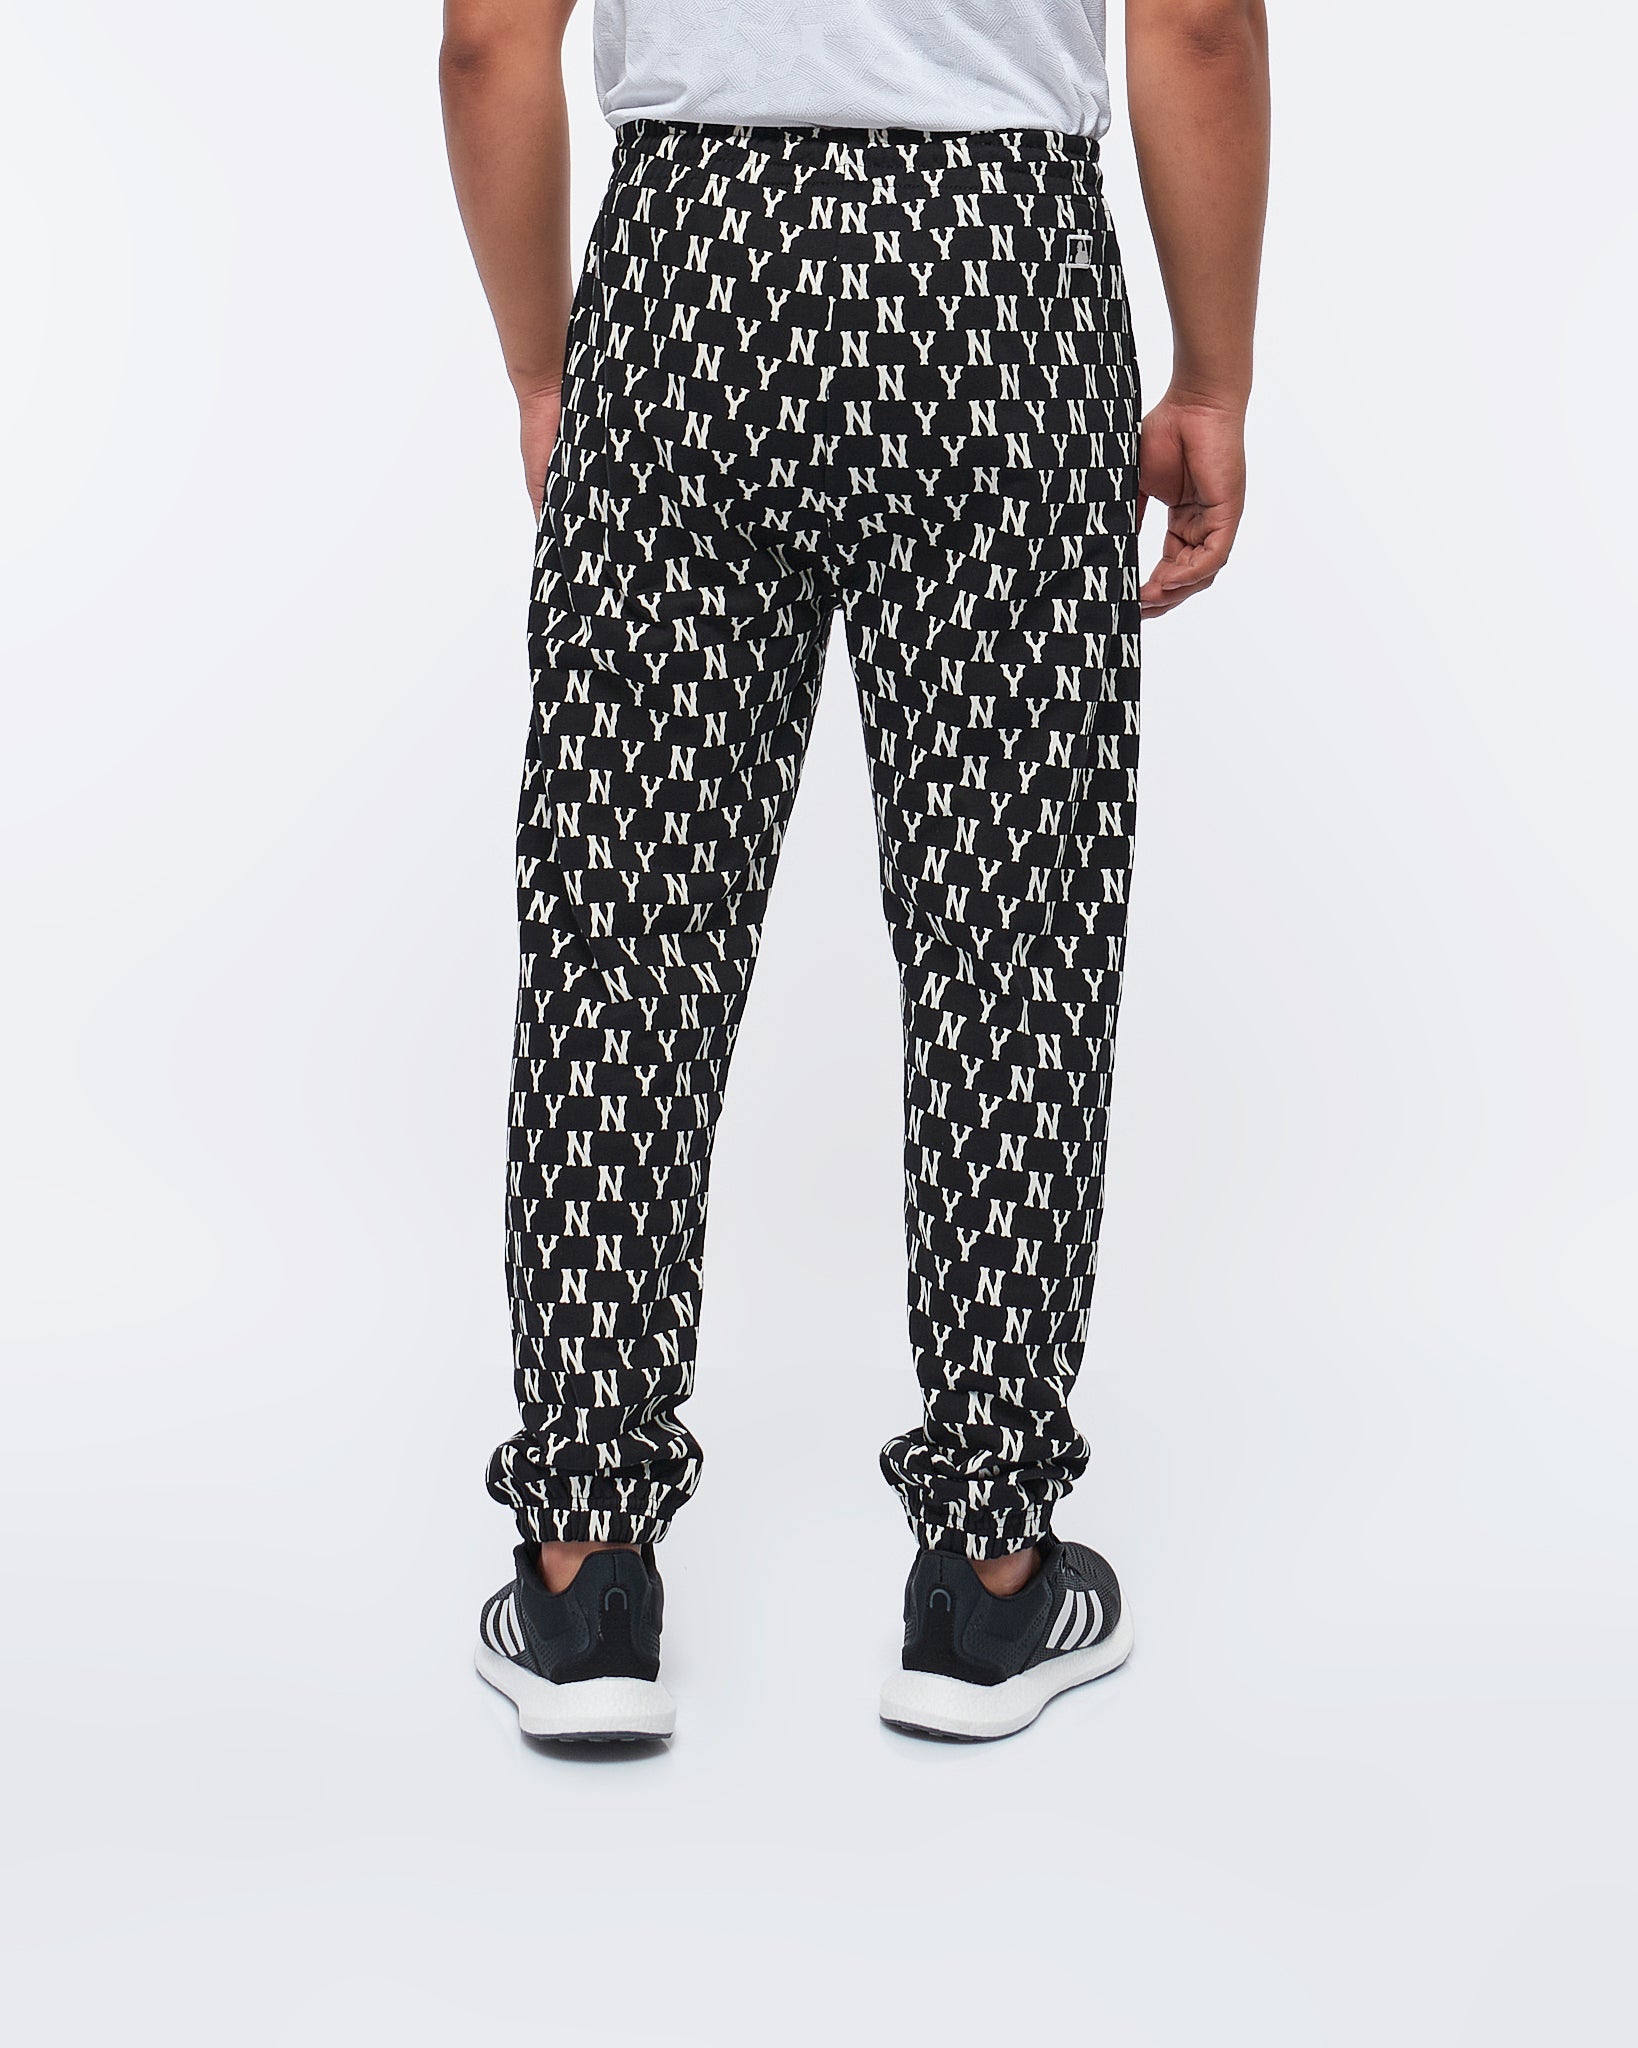 MOI OUTFIT-NY Over Printed Men Joggers 35.90